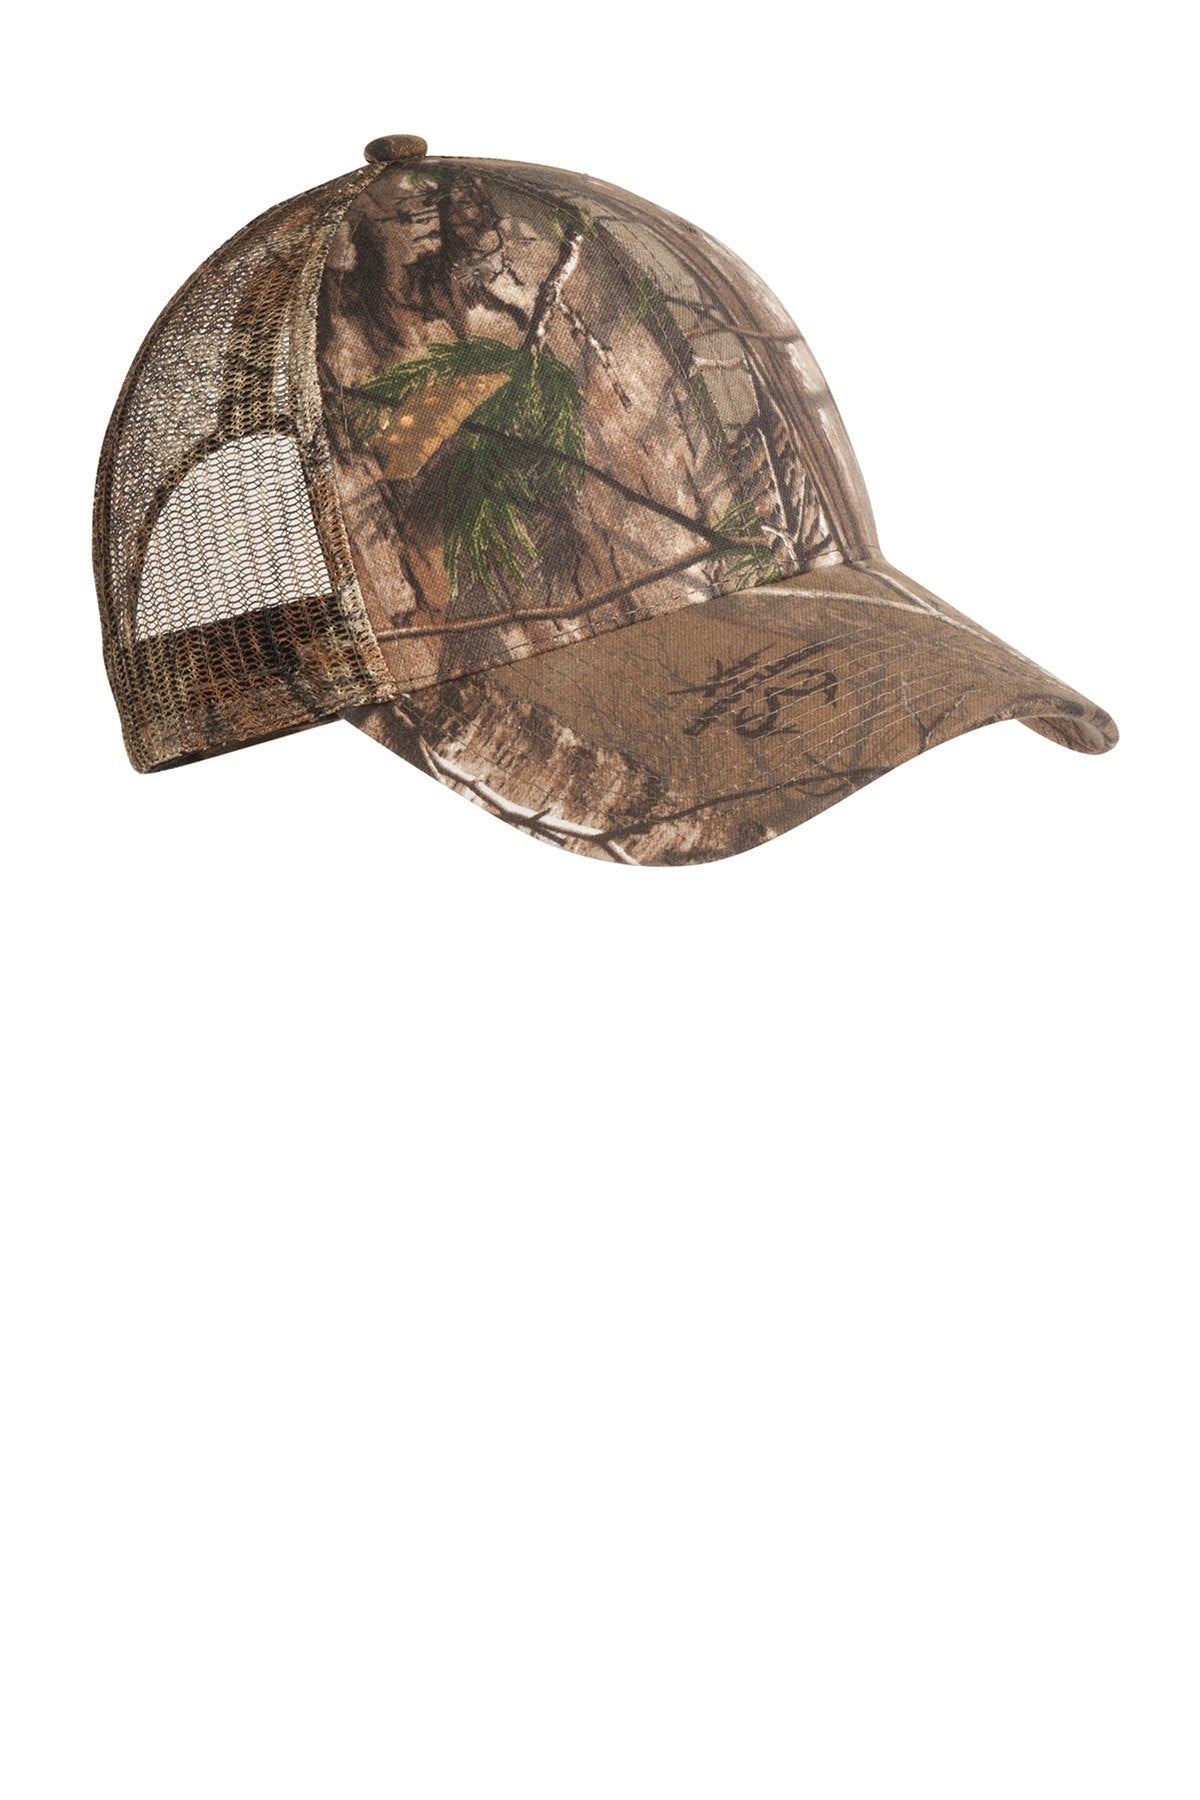 Port Authority Pro Camouflage Series Cap with Mesh Back C869 Realtree Xtra